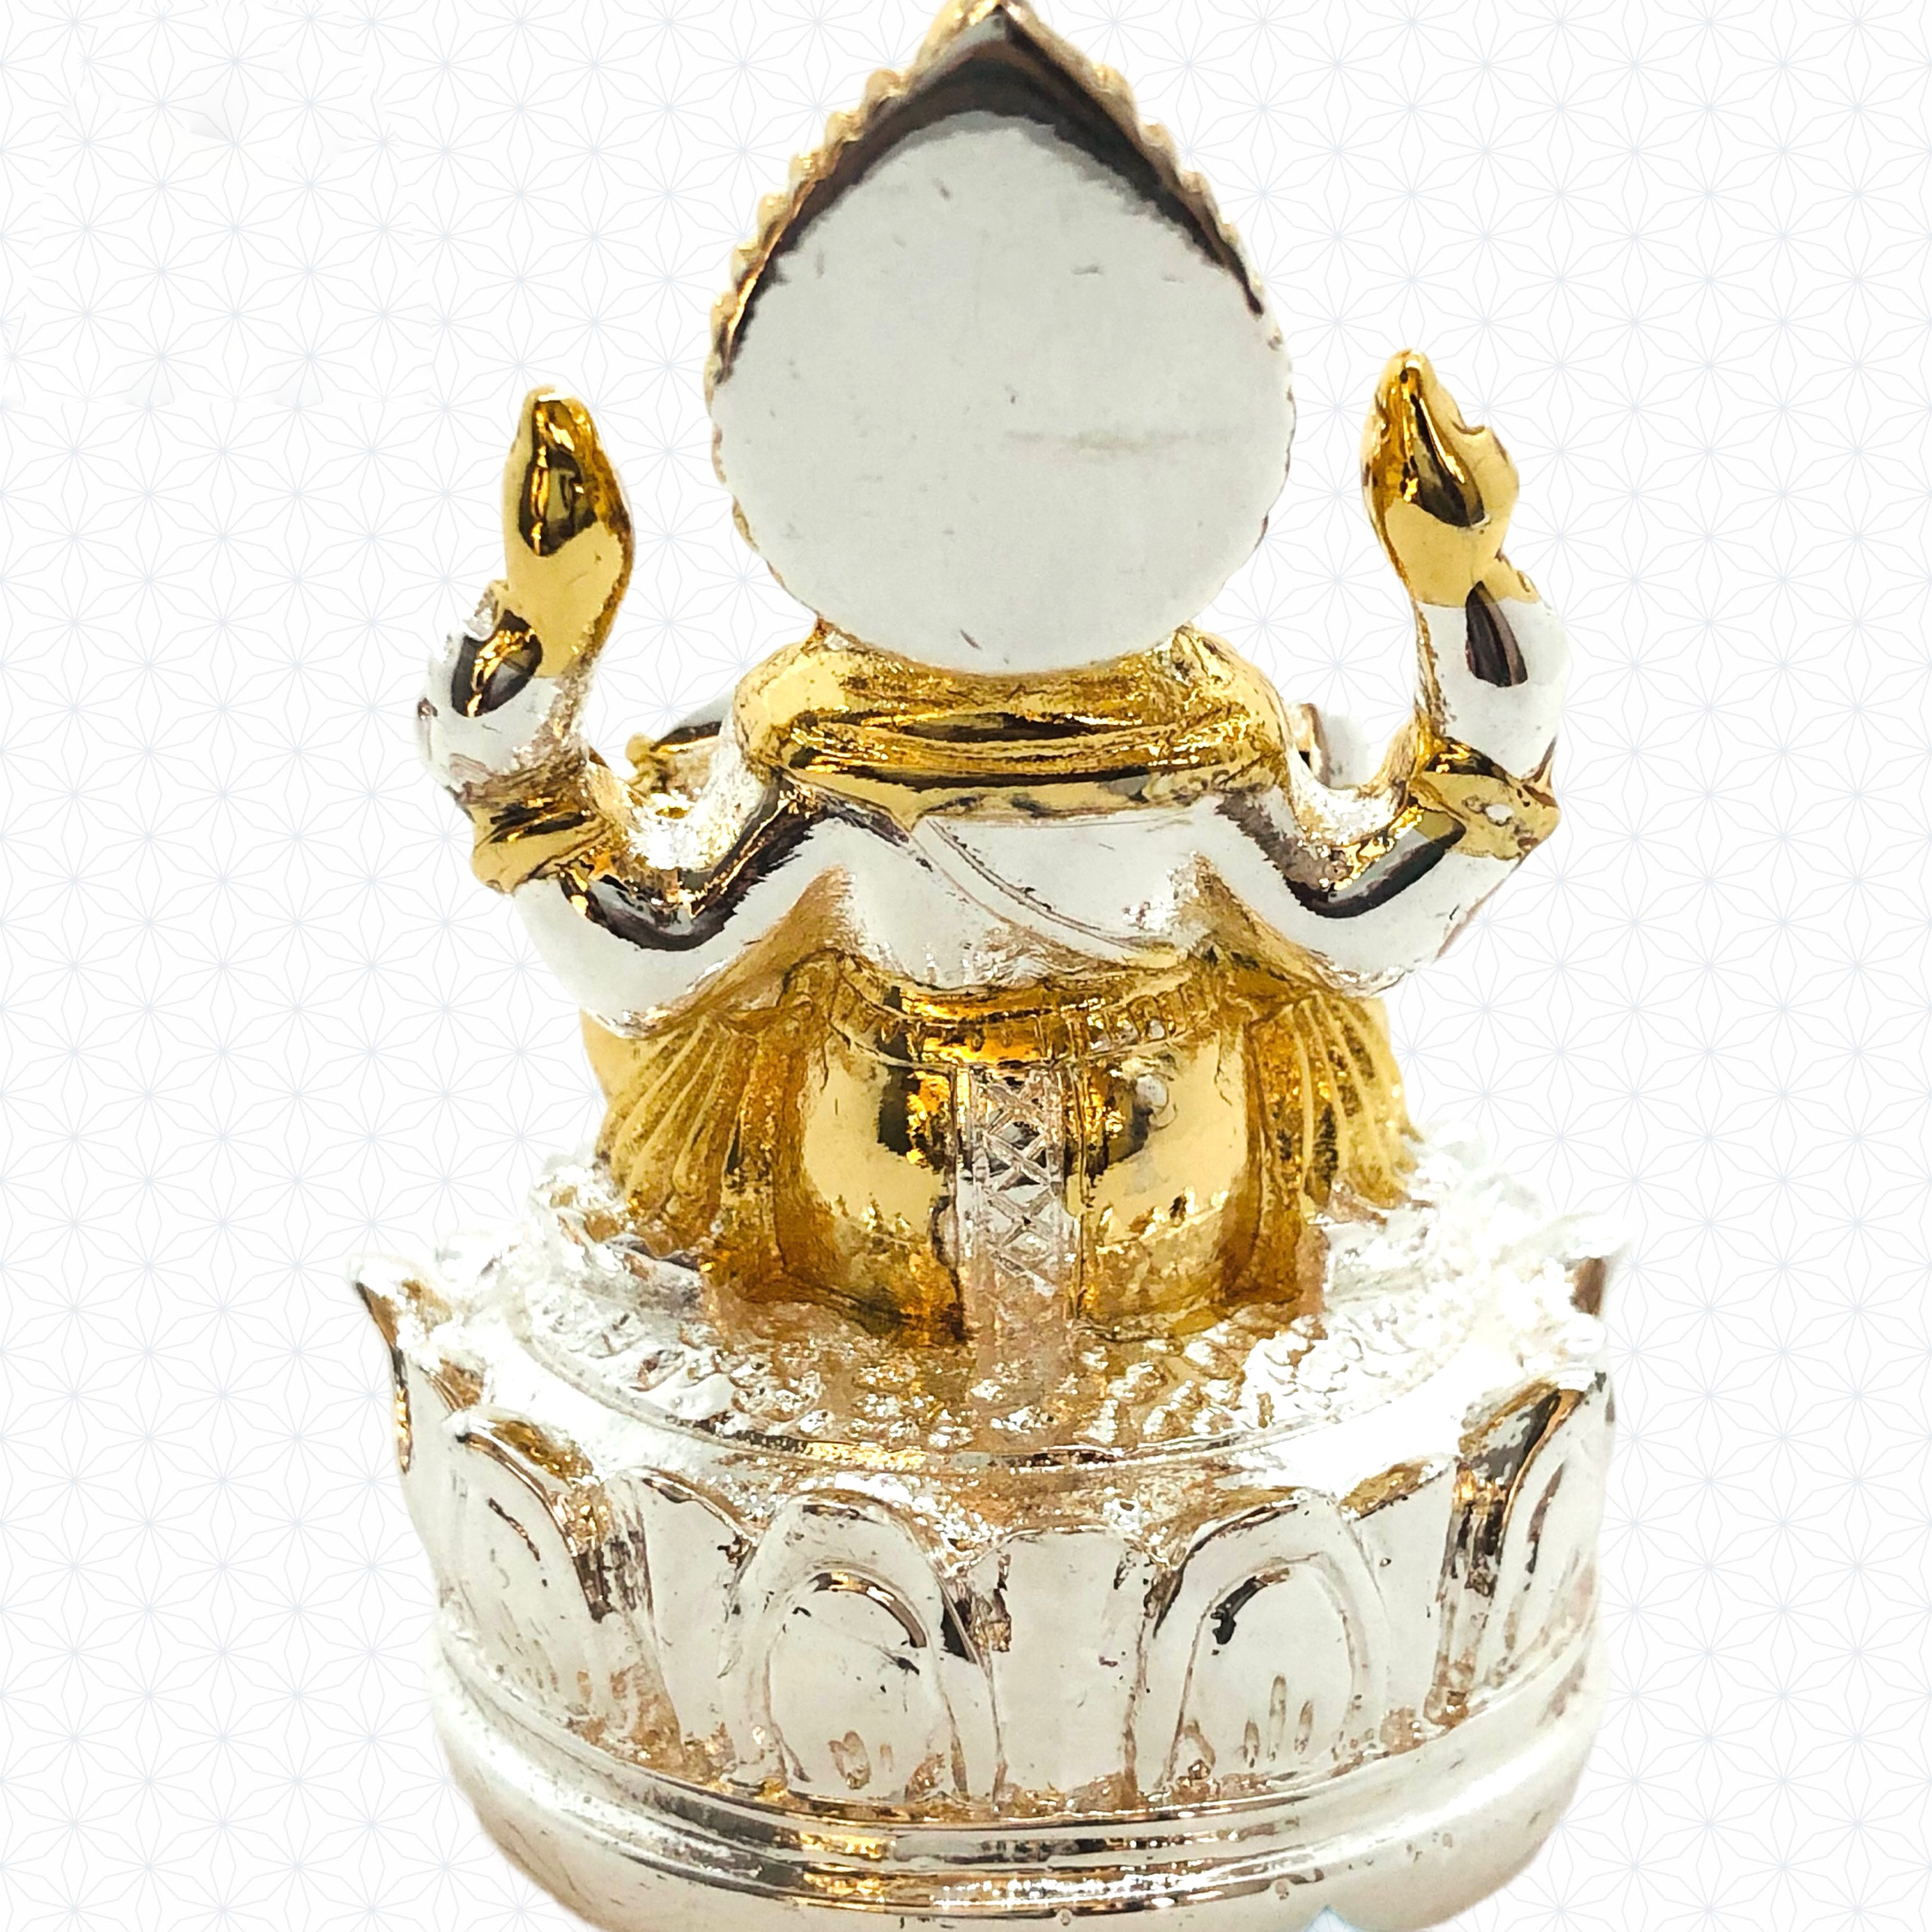 Silver & Gold Plated Shree Ganesh Idol / Murti for Puja Room, Temple, Meditation, Office, Business & Home Decoration Gift Collection